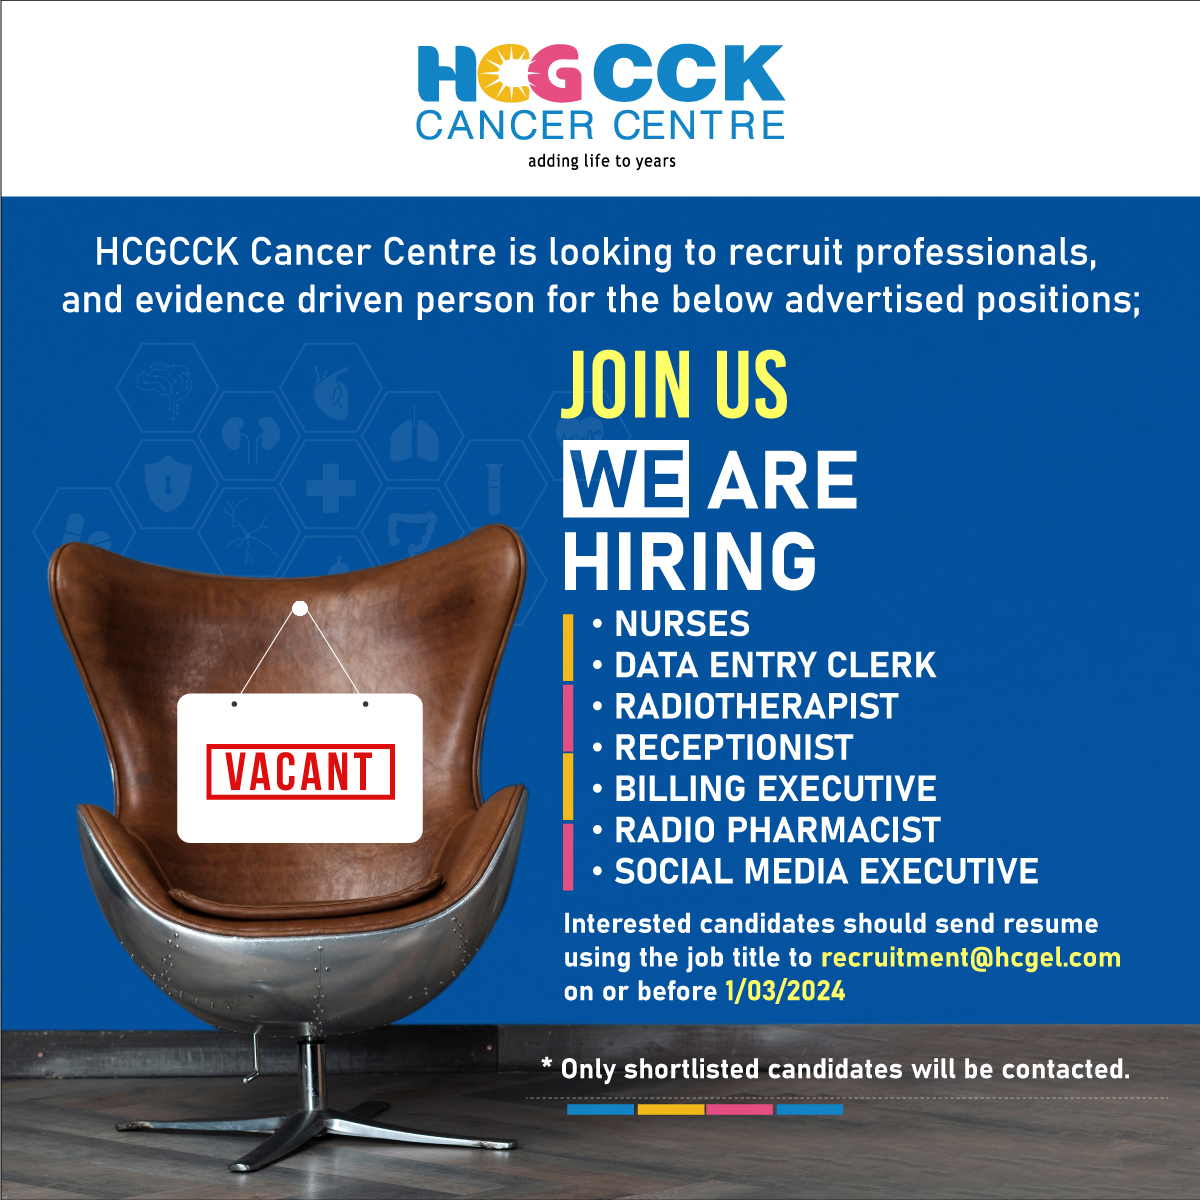 HCGCCK Cancer Centre is looking to recruit professionals, and evidence driven person for the below advertised positions.